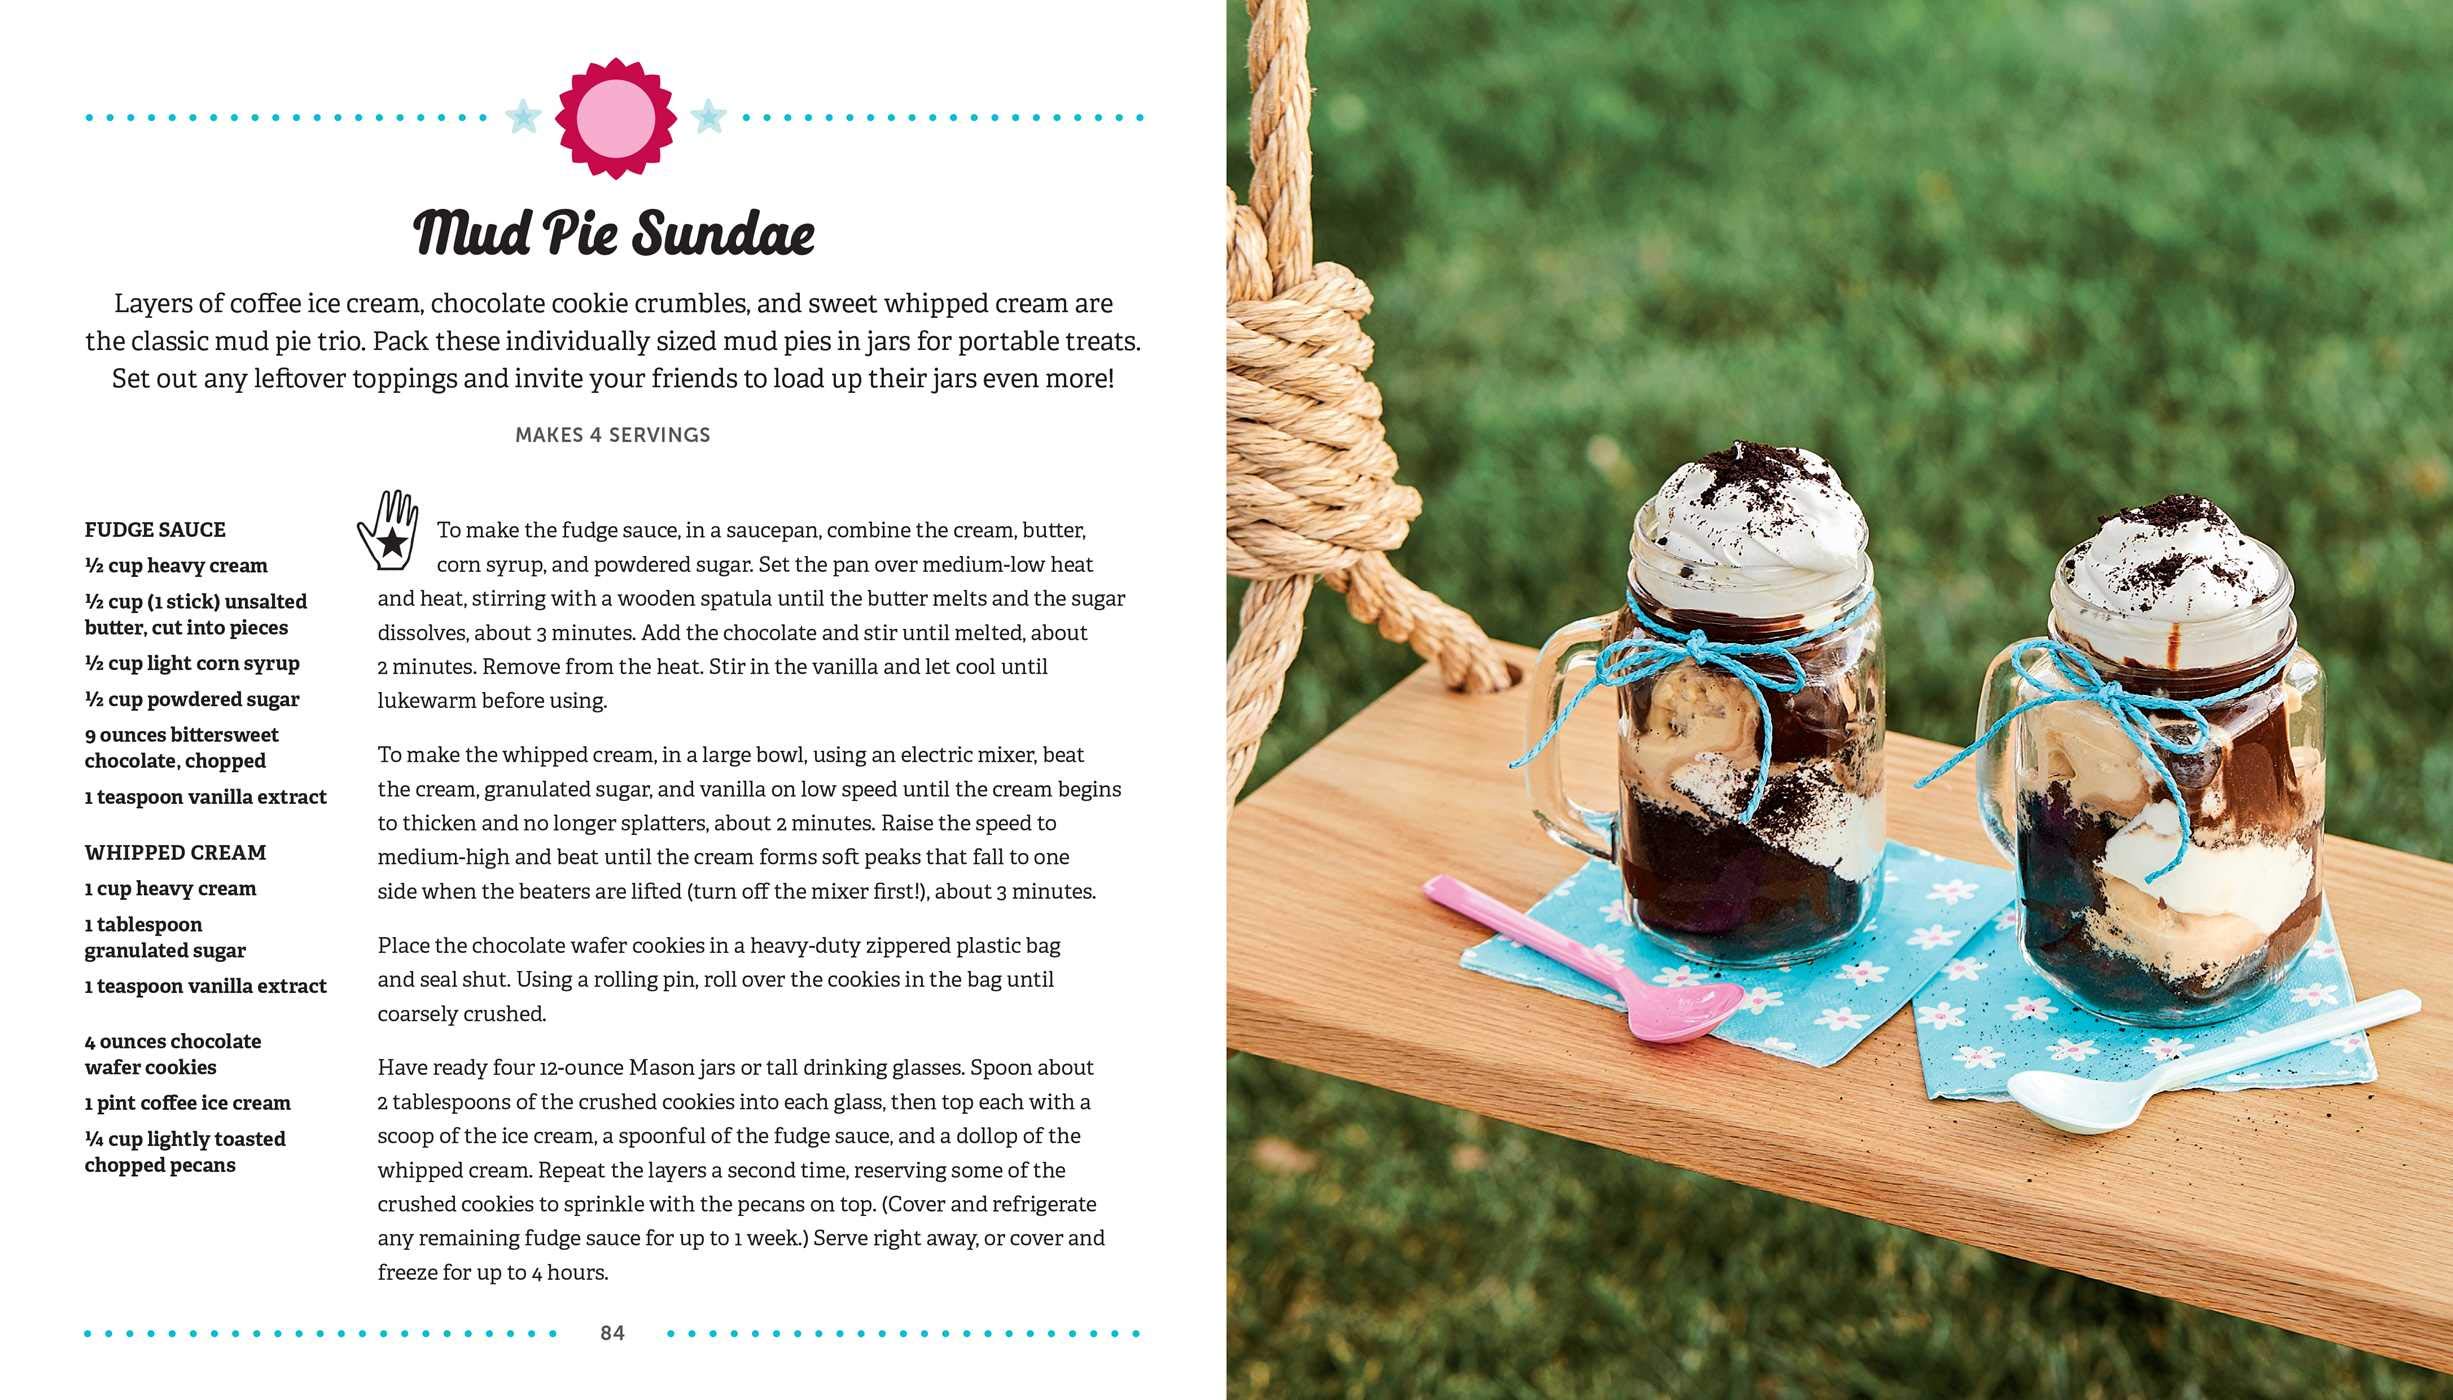 American Girl Summer Treats: Refreshing Recipes for Cupcakes, Cookies, Ice Pops & More